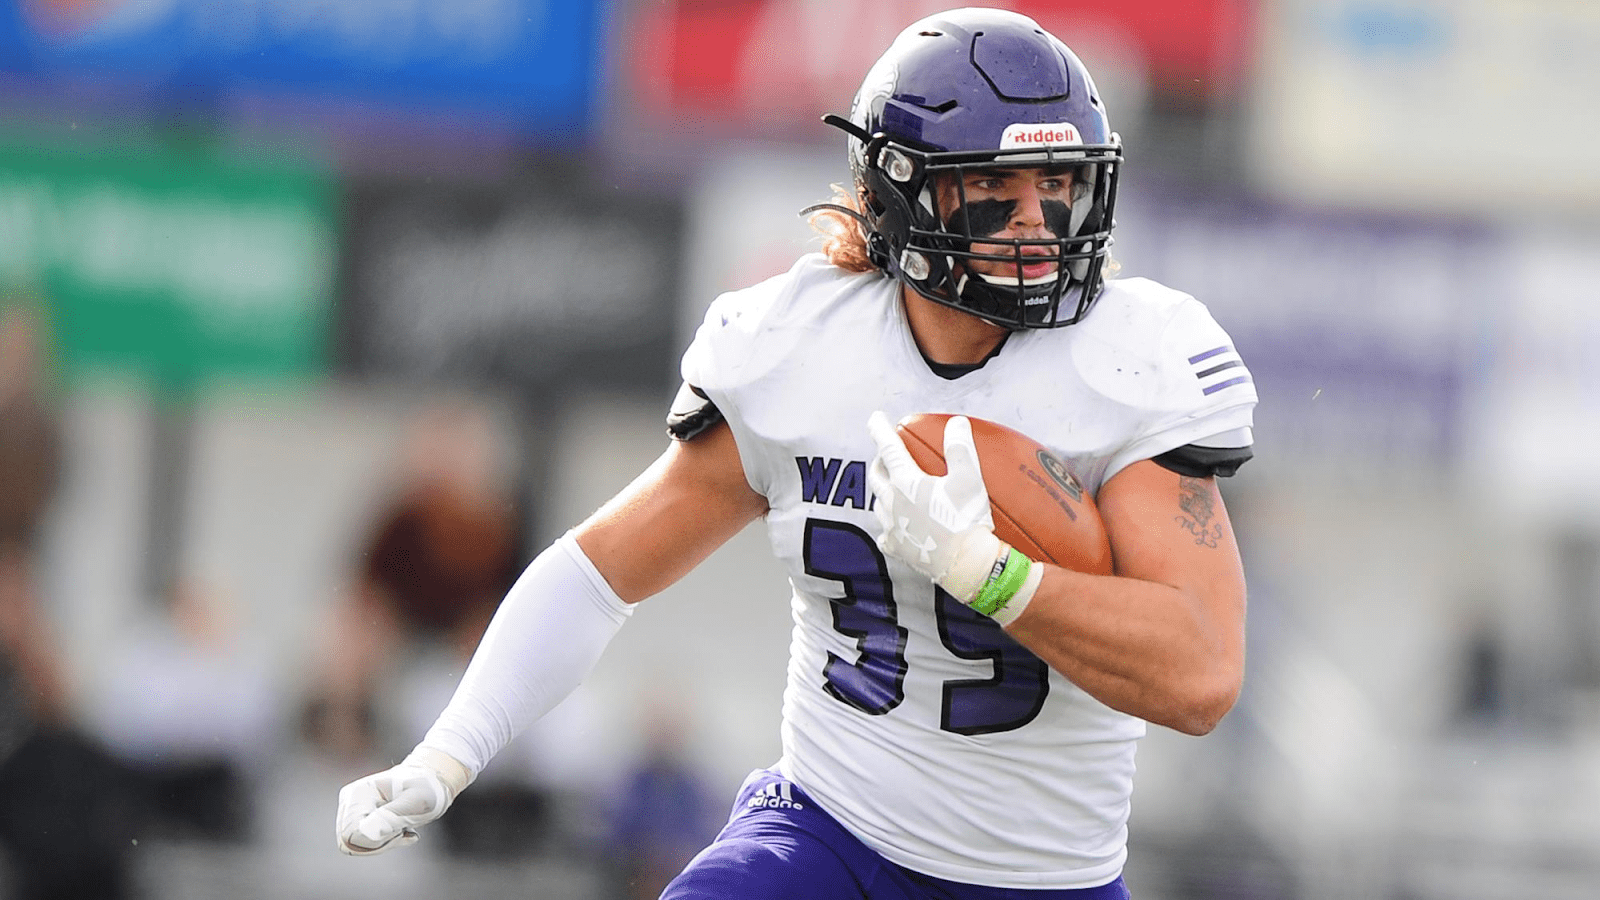 LB Clay Schueffner is the fierce leader of the Winona State defense. He recently sat down with NFL Draft Diamonds writer Jimmy Williams.